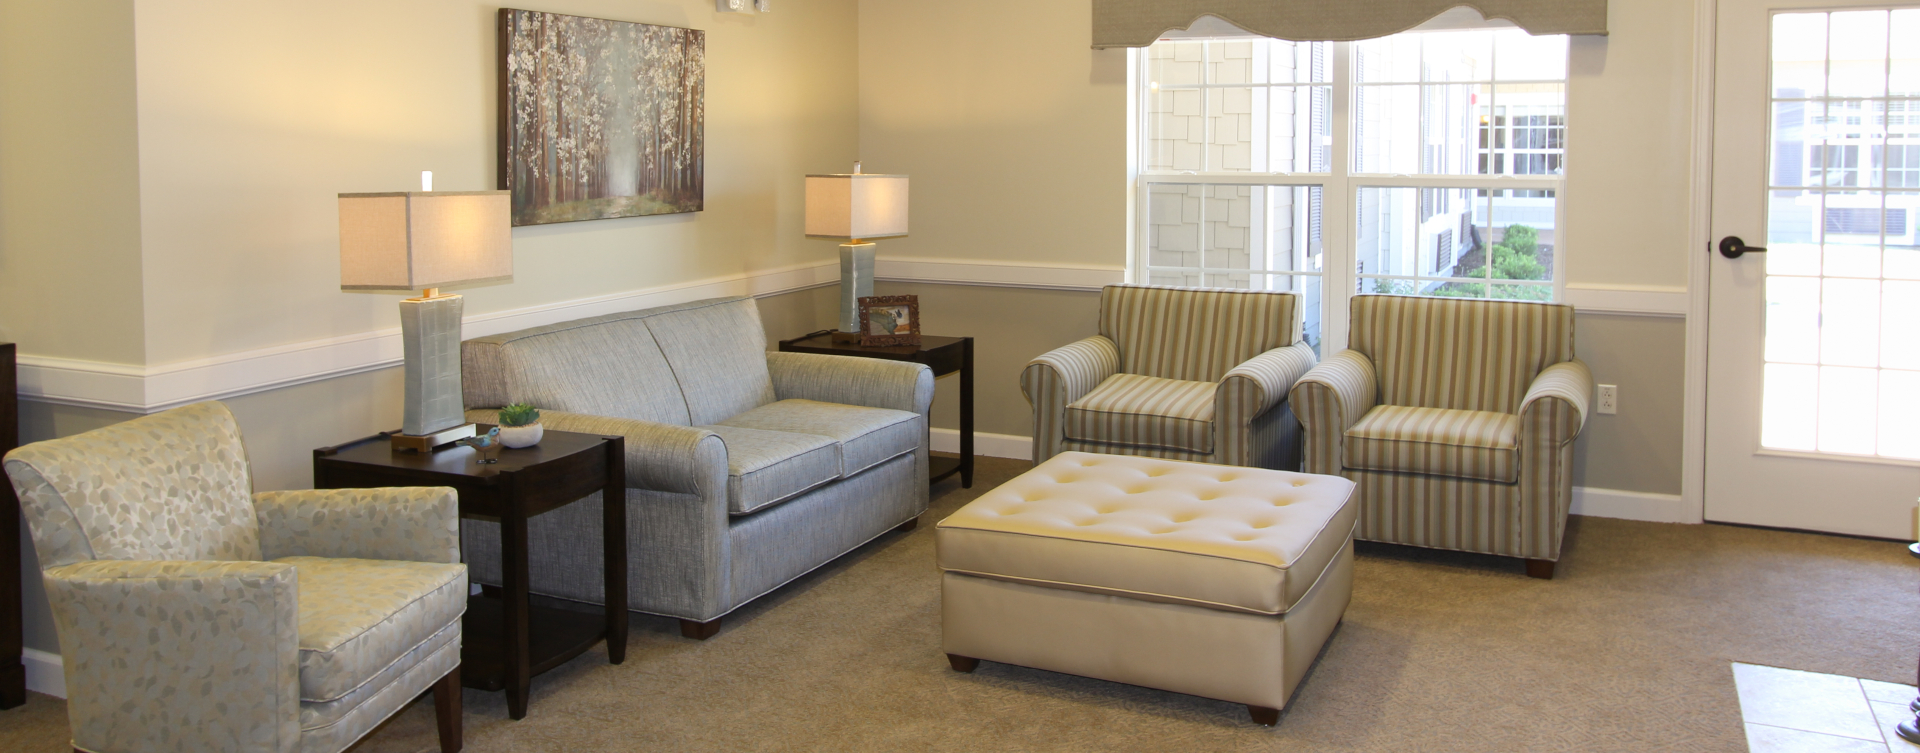 Enjoy a good snooze in the sitting area at Bickford of Tinley Park